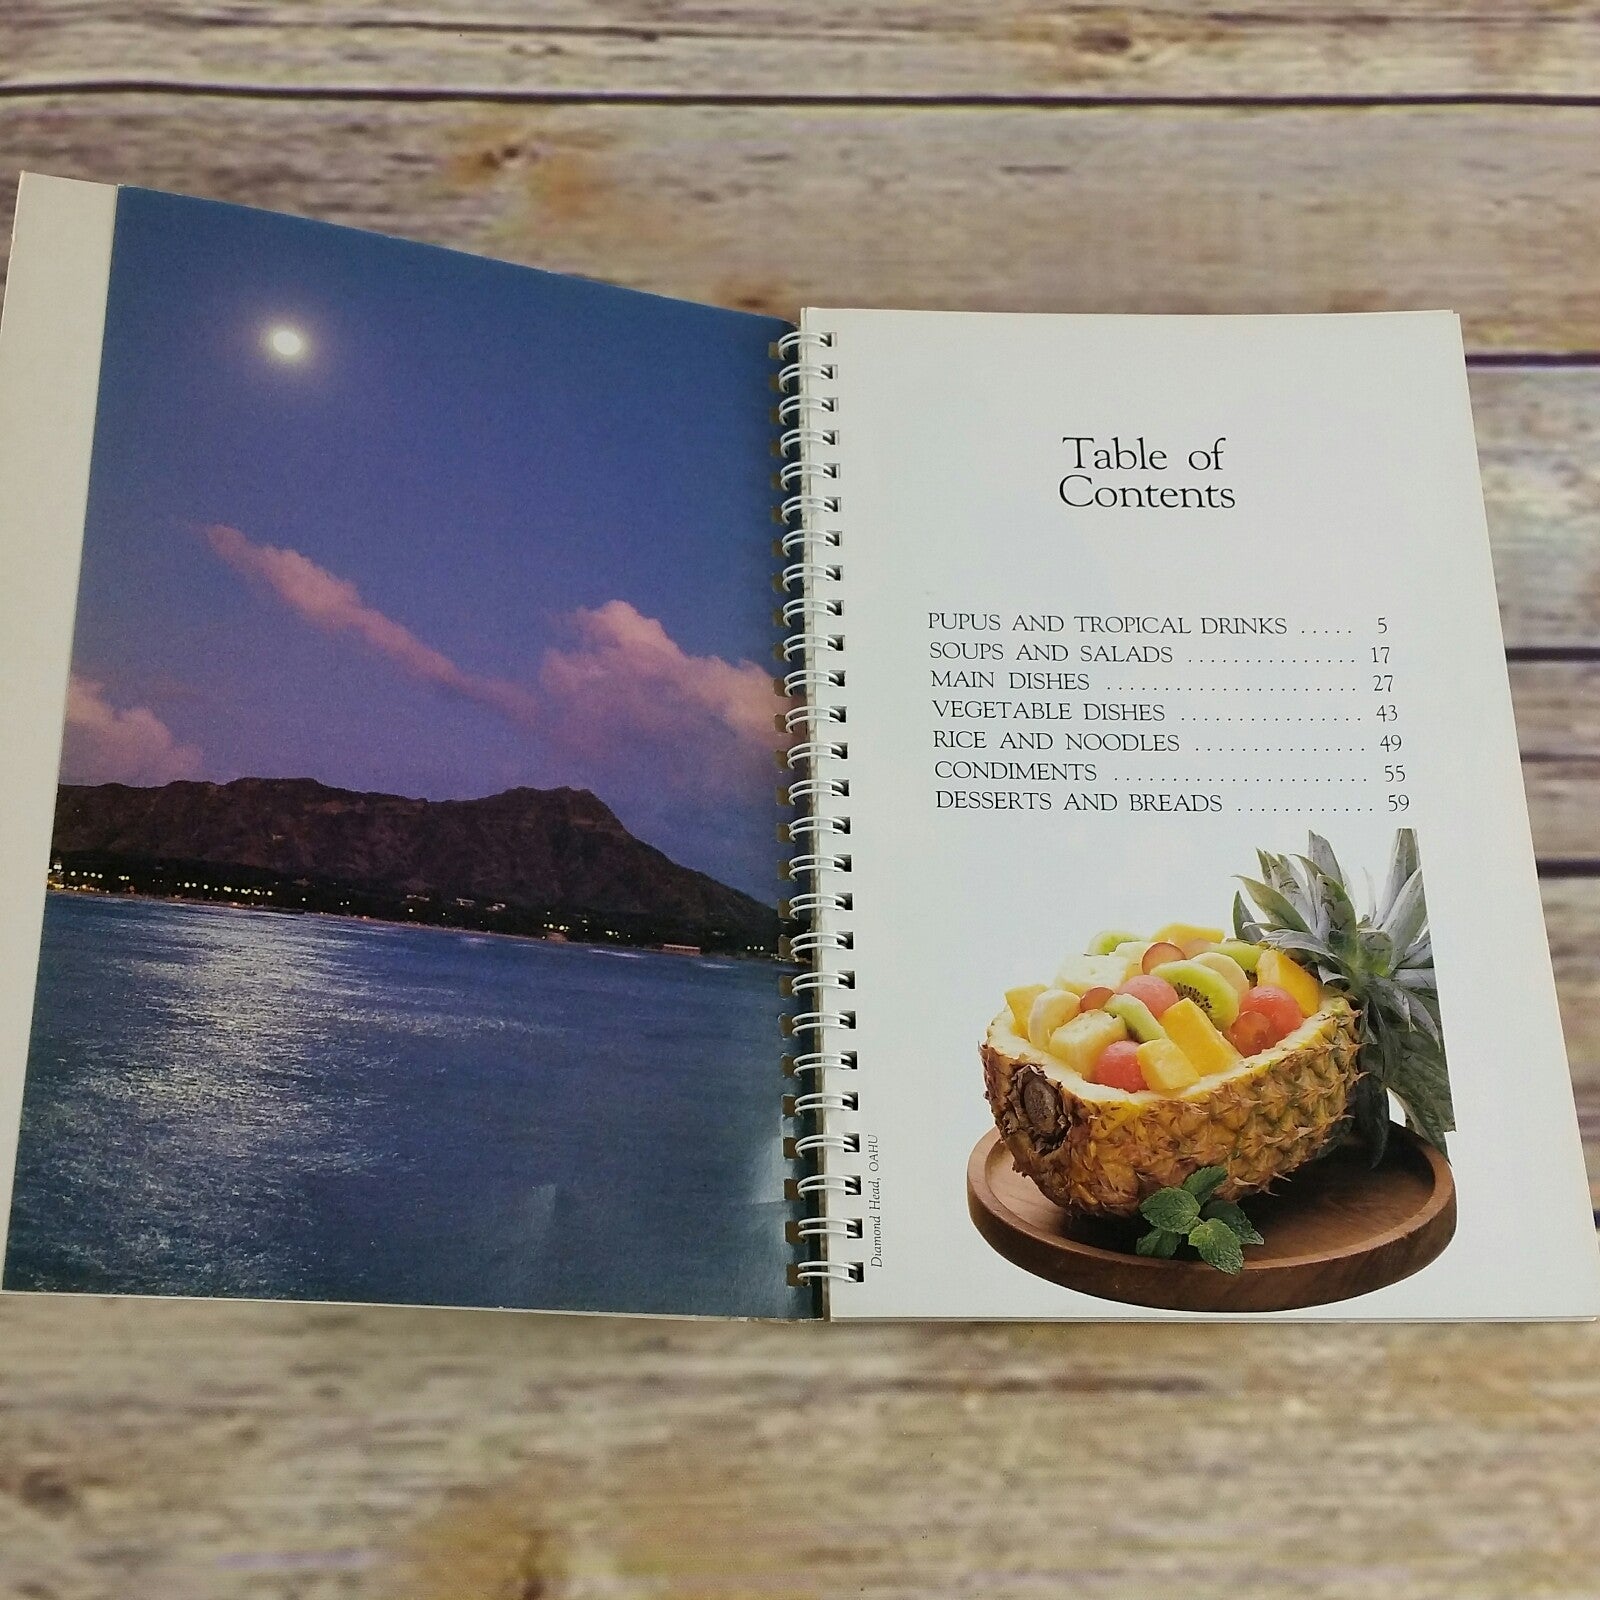 Vintage Hawaii Cookbook Favorite Recipes from Hawaii 1995 Drink Recipes Soups Salads Spiral Bound Island Heritage - At Grandma's Table